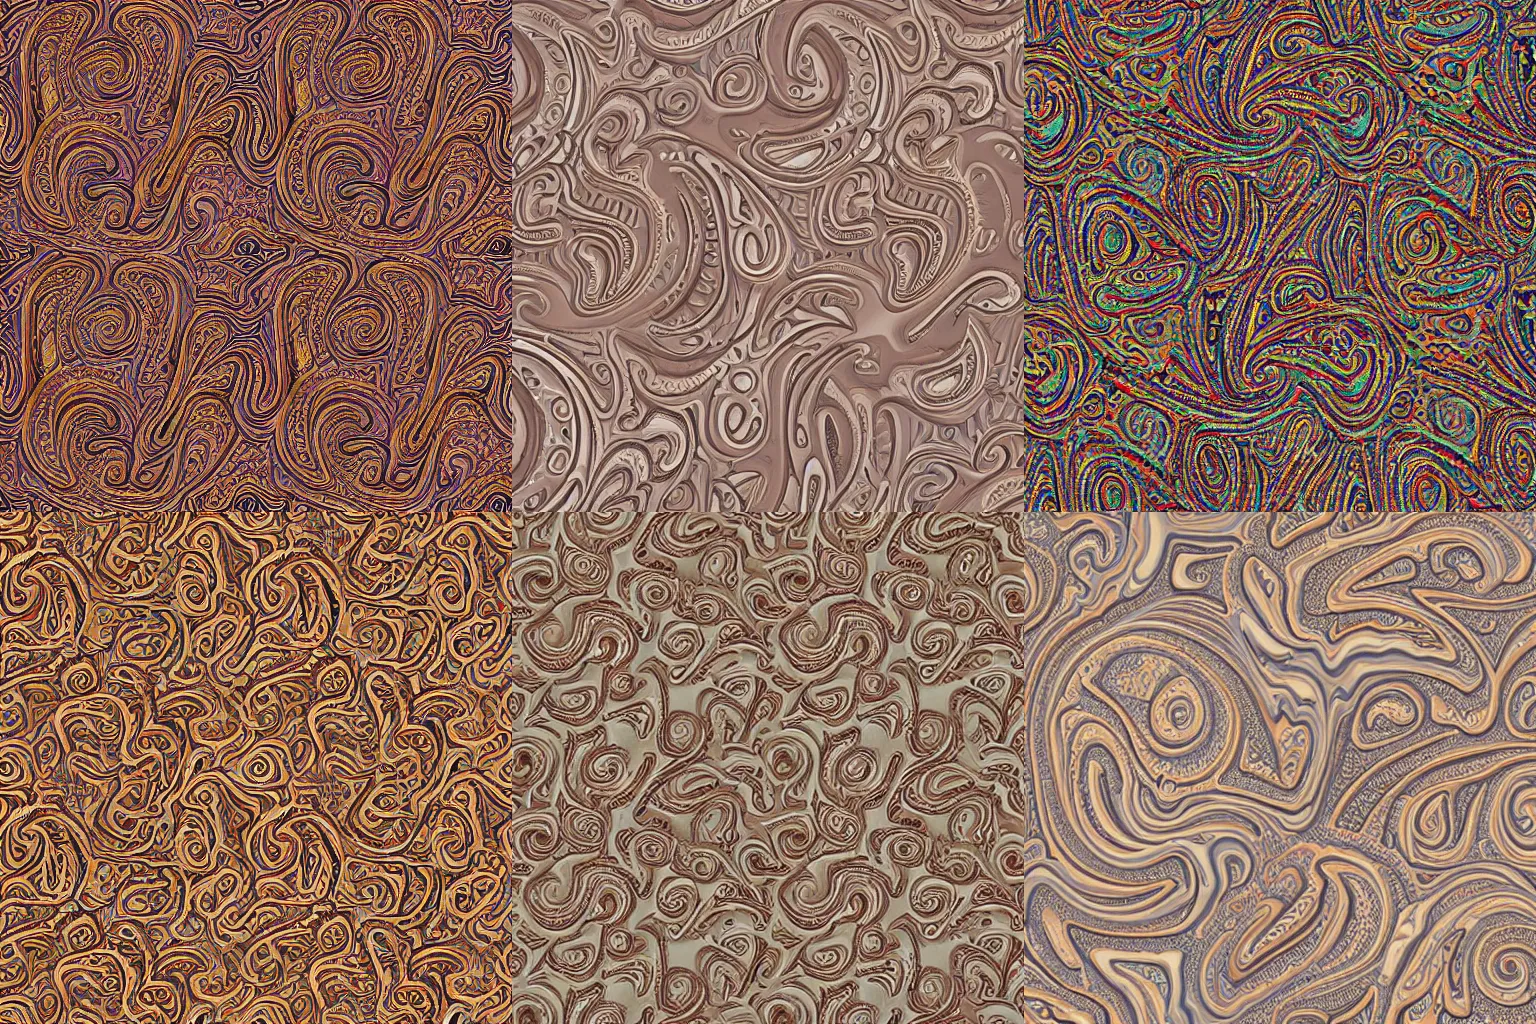 Prompt: 3d embossed bumpy textured maze fractal organic swirling muted colors paisley